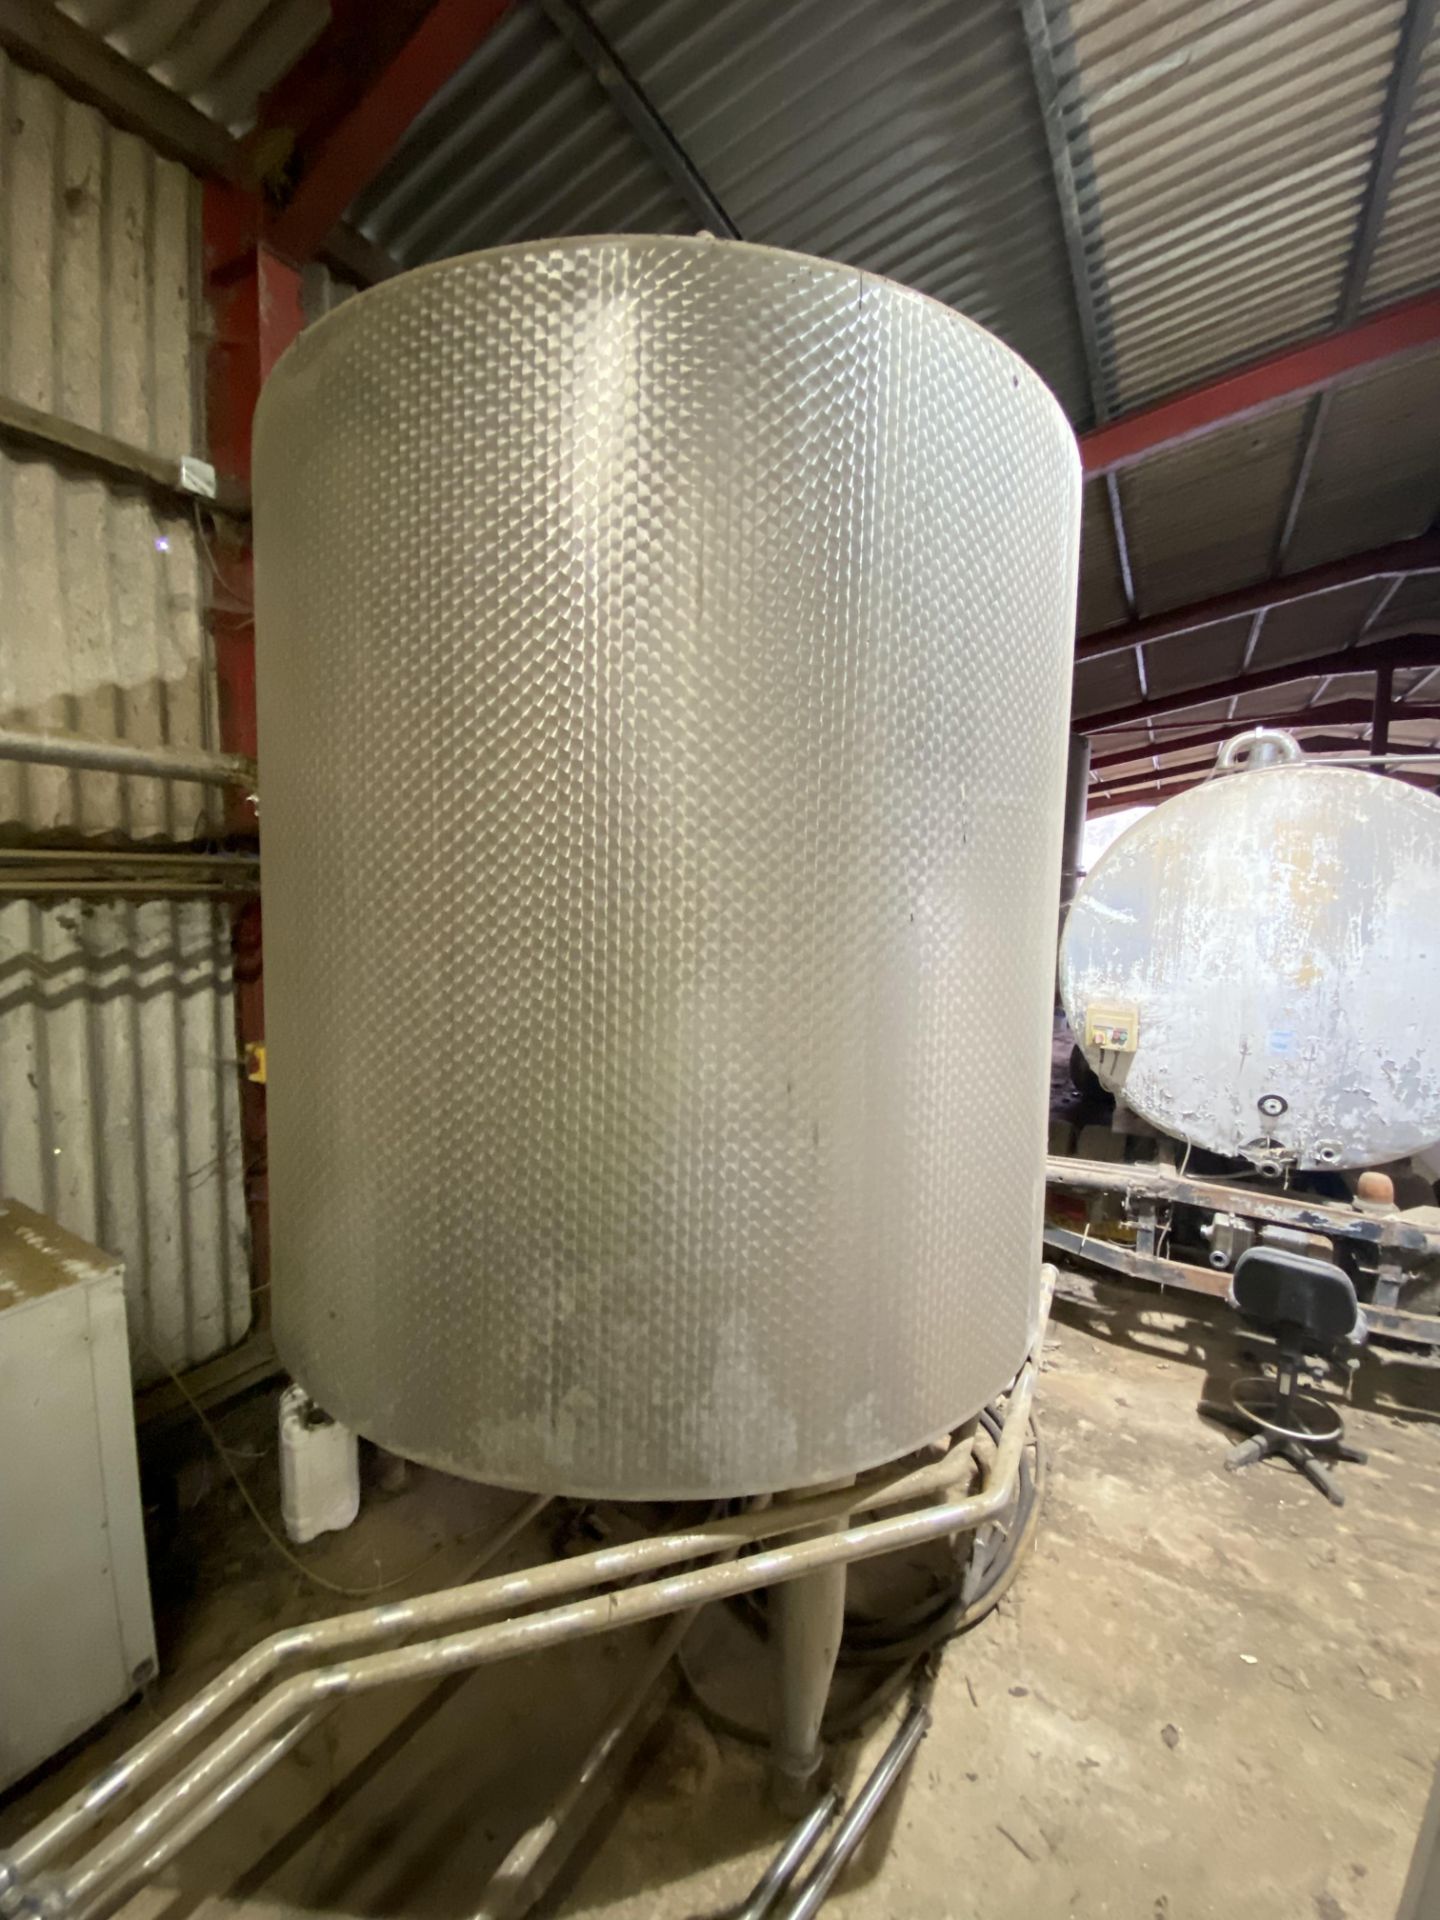 Pasilac SBQ VERTICAL STAINLESS STEEL MIXING VESSEL, code no. 733.16, serial no. 54.754/01.2, approx. - Image 3 of 4